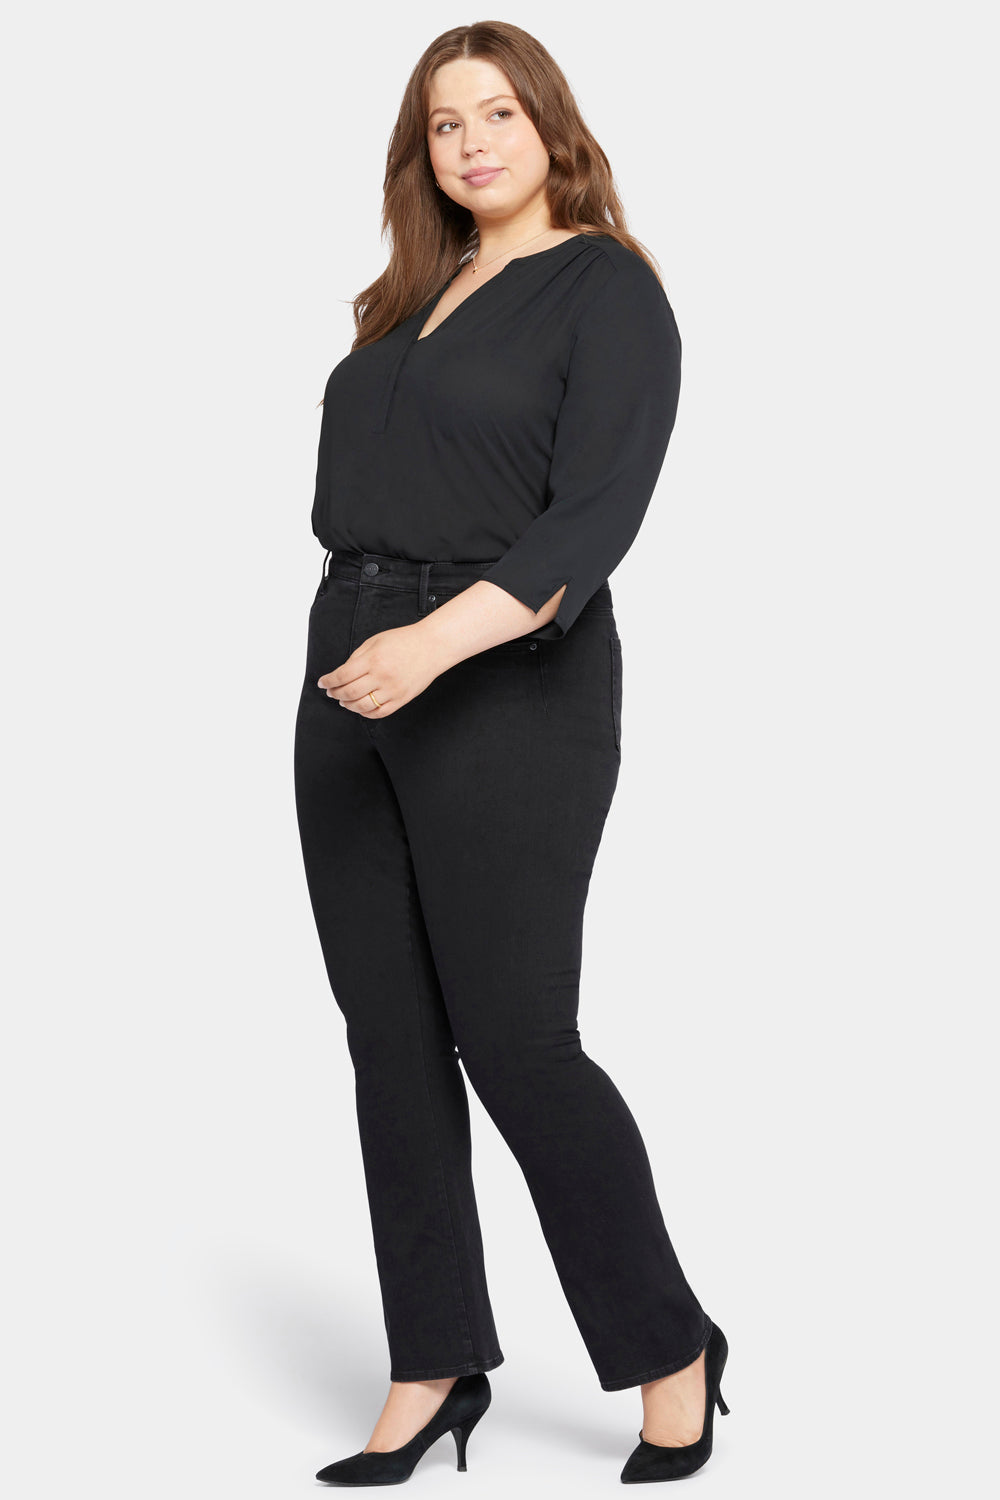 Le Silhouette Slim Bootcut Jeans In Petite Plus Size With High Rise